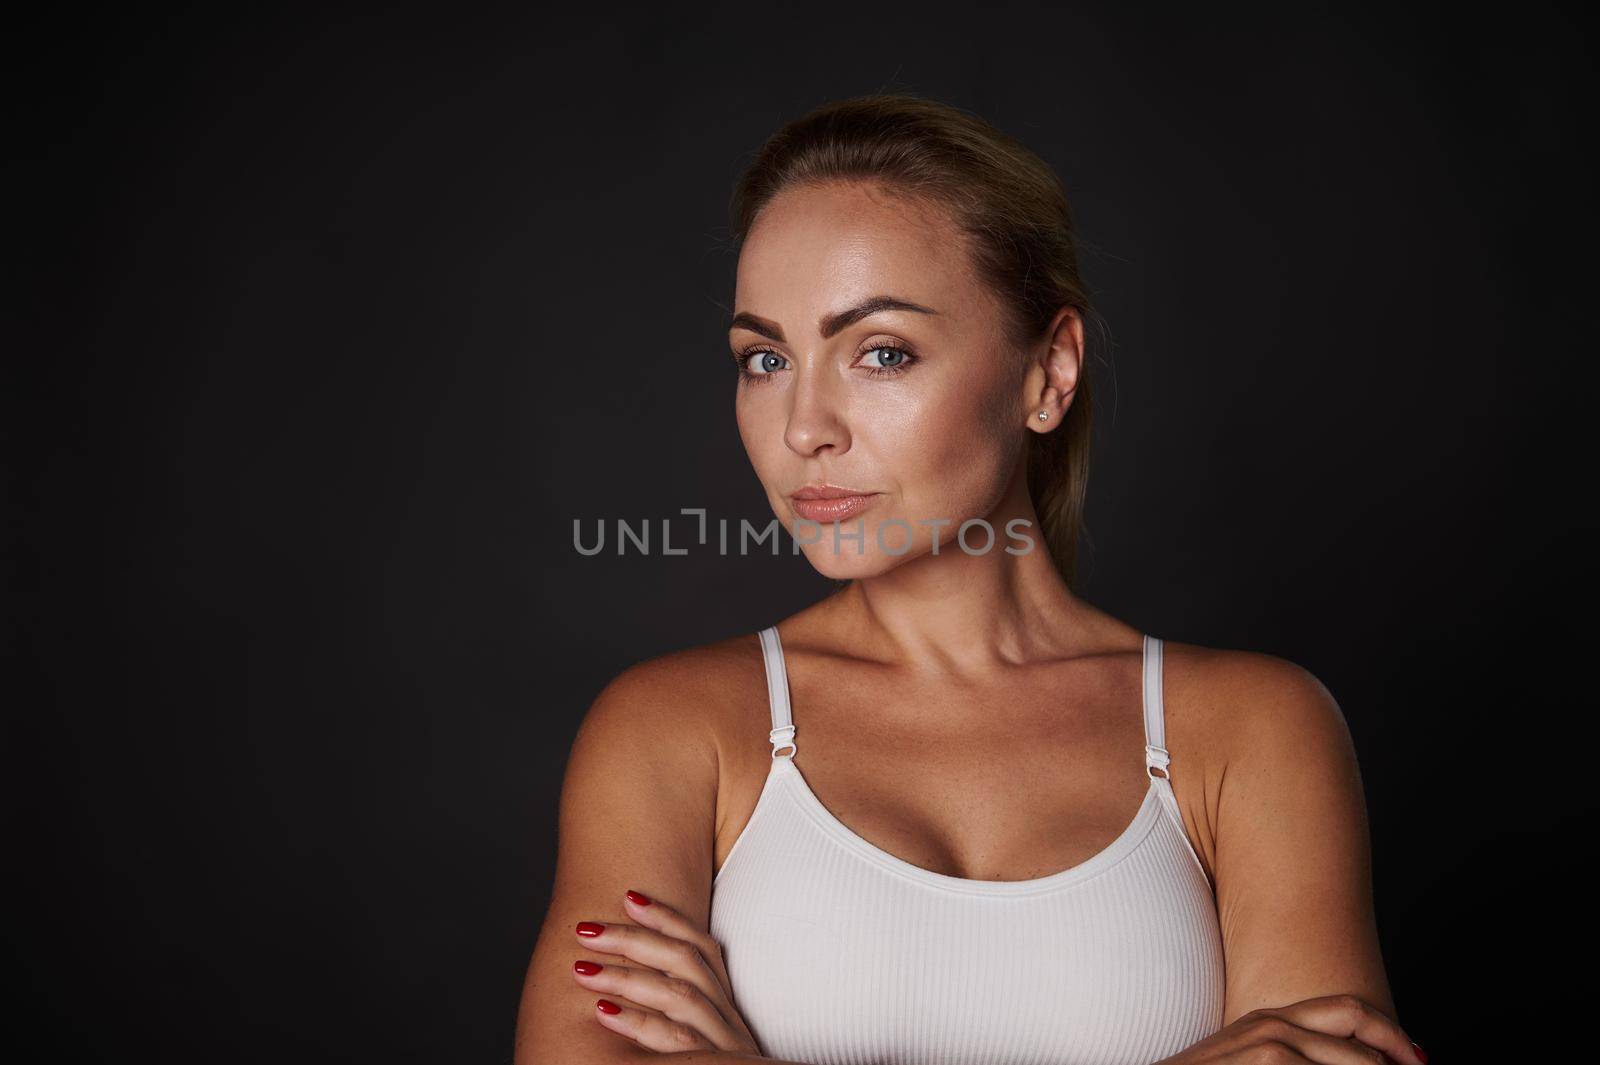 Waist length portrait of an attractive young blonde woman with natural makeup and beautiful aesthetic body wearing a white top standing with crossed arms against black background with copy space by artgf